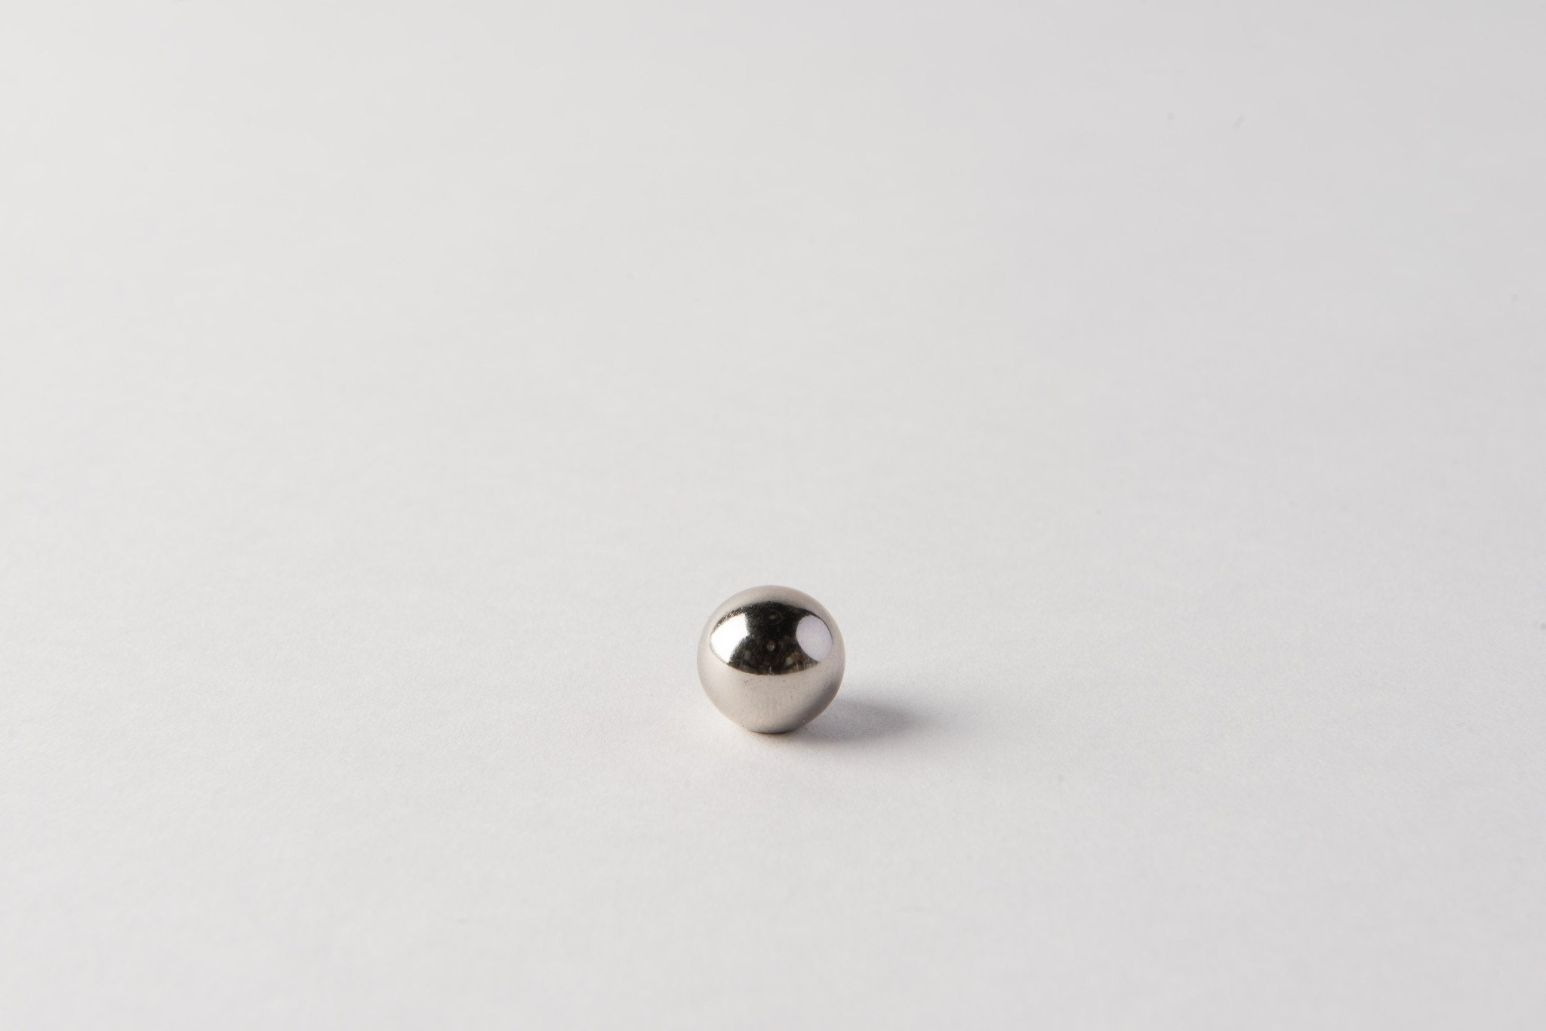 https://www.hotel-lamps.com/resources/assets/images/product_images/Polished Nickel Sphere 20mm.jpg